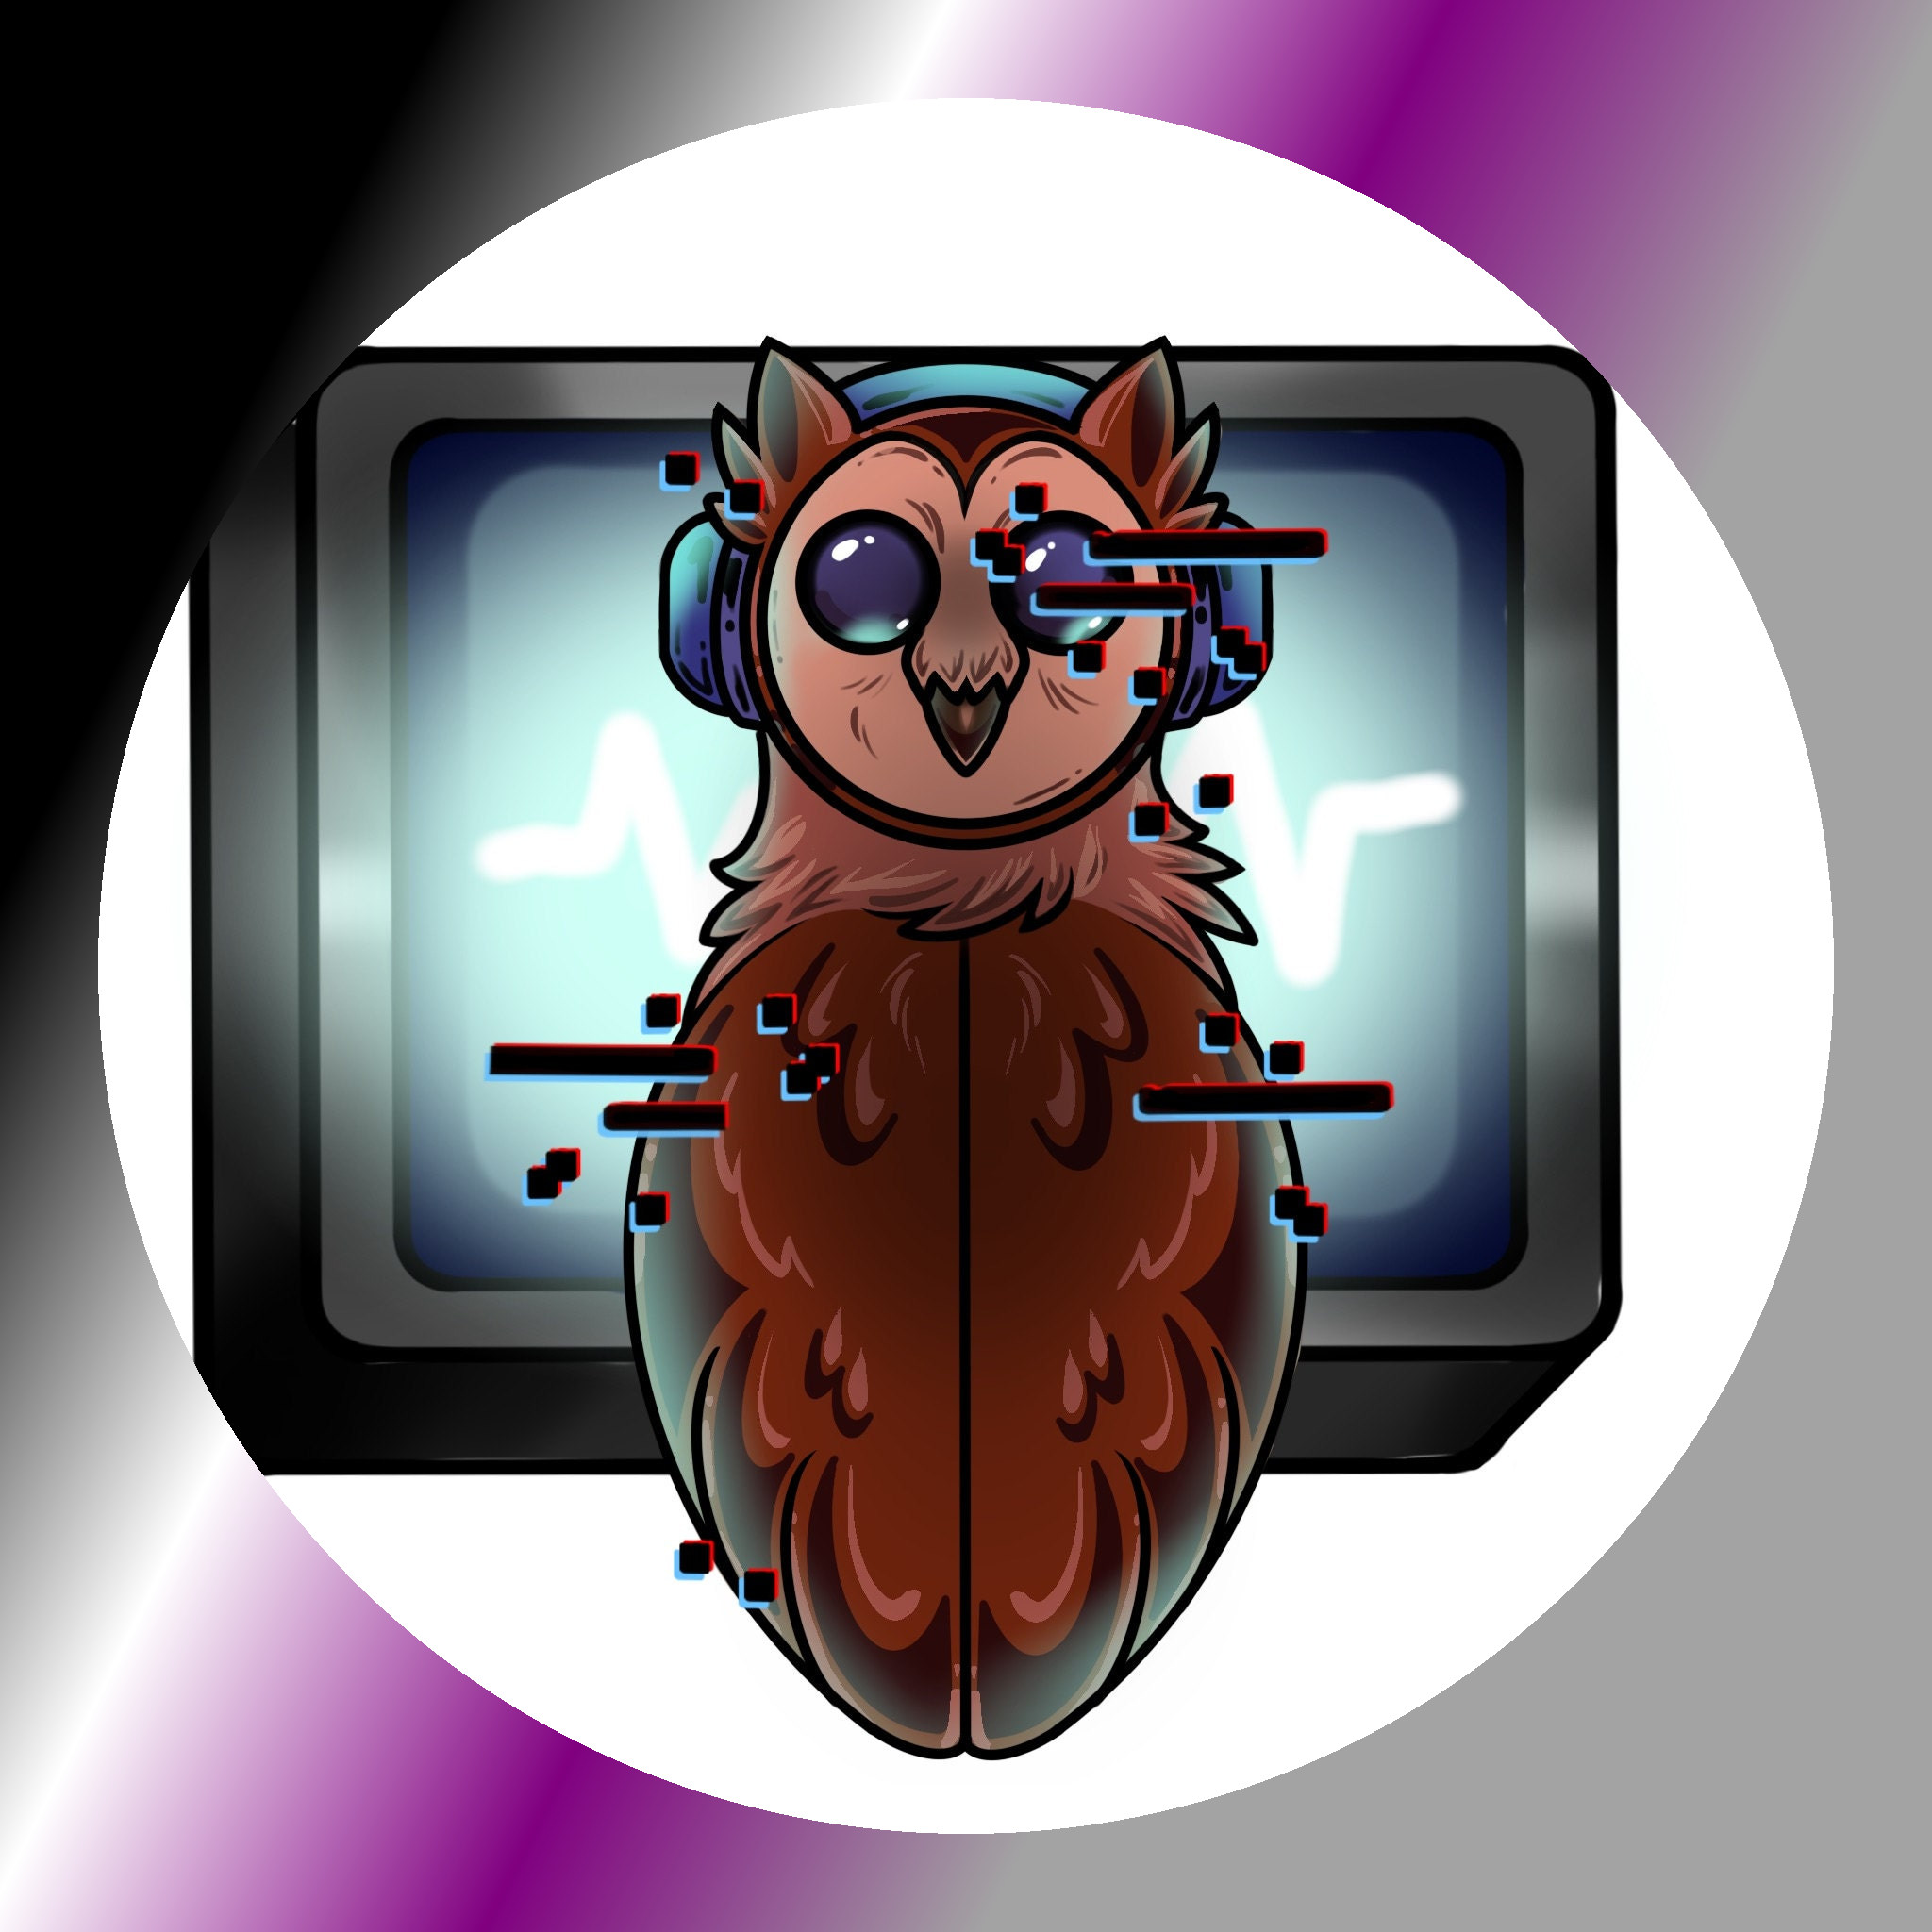 A Brown owl at a computer surrounded by the demisexual pride colors